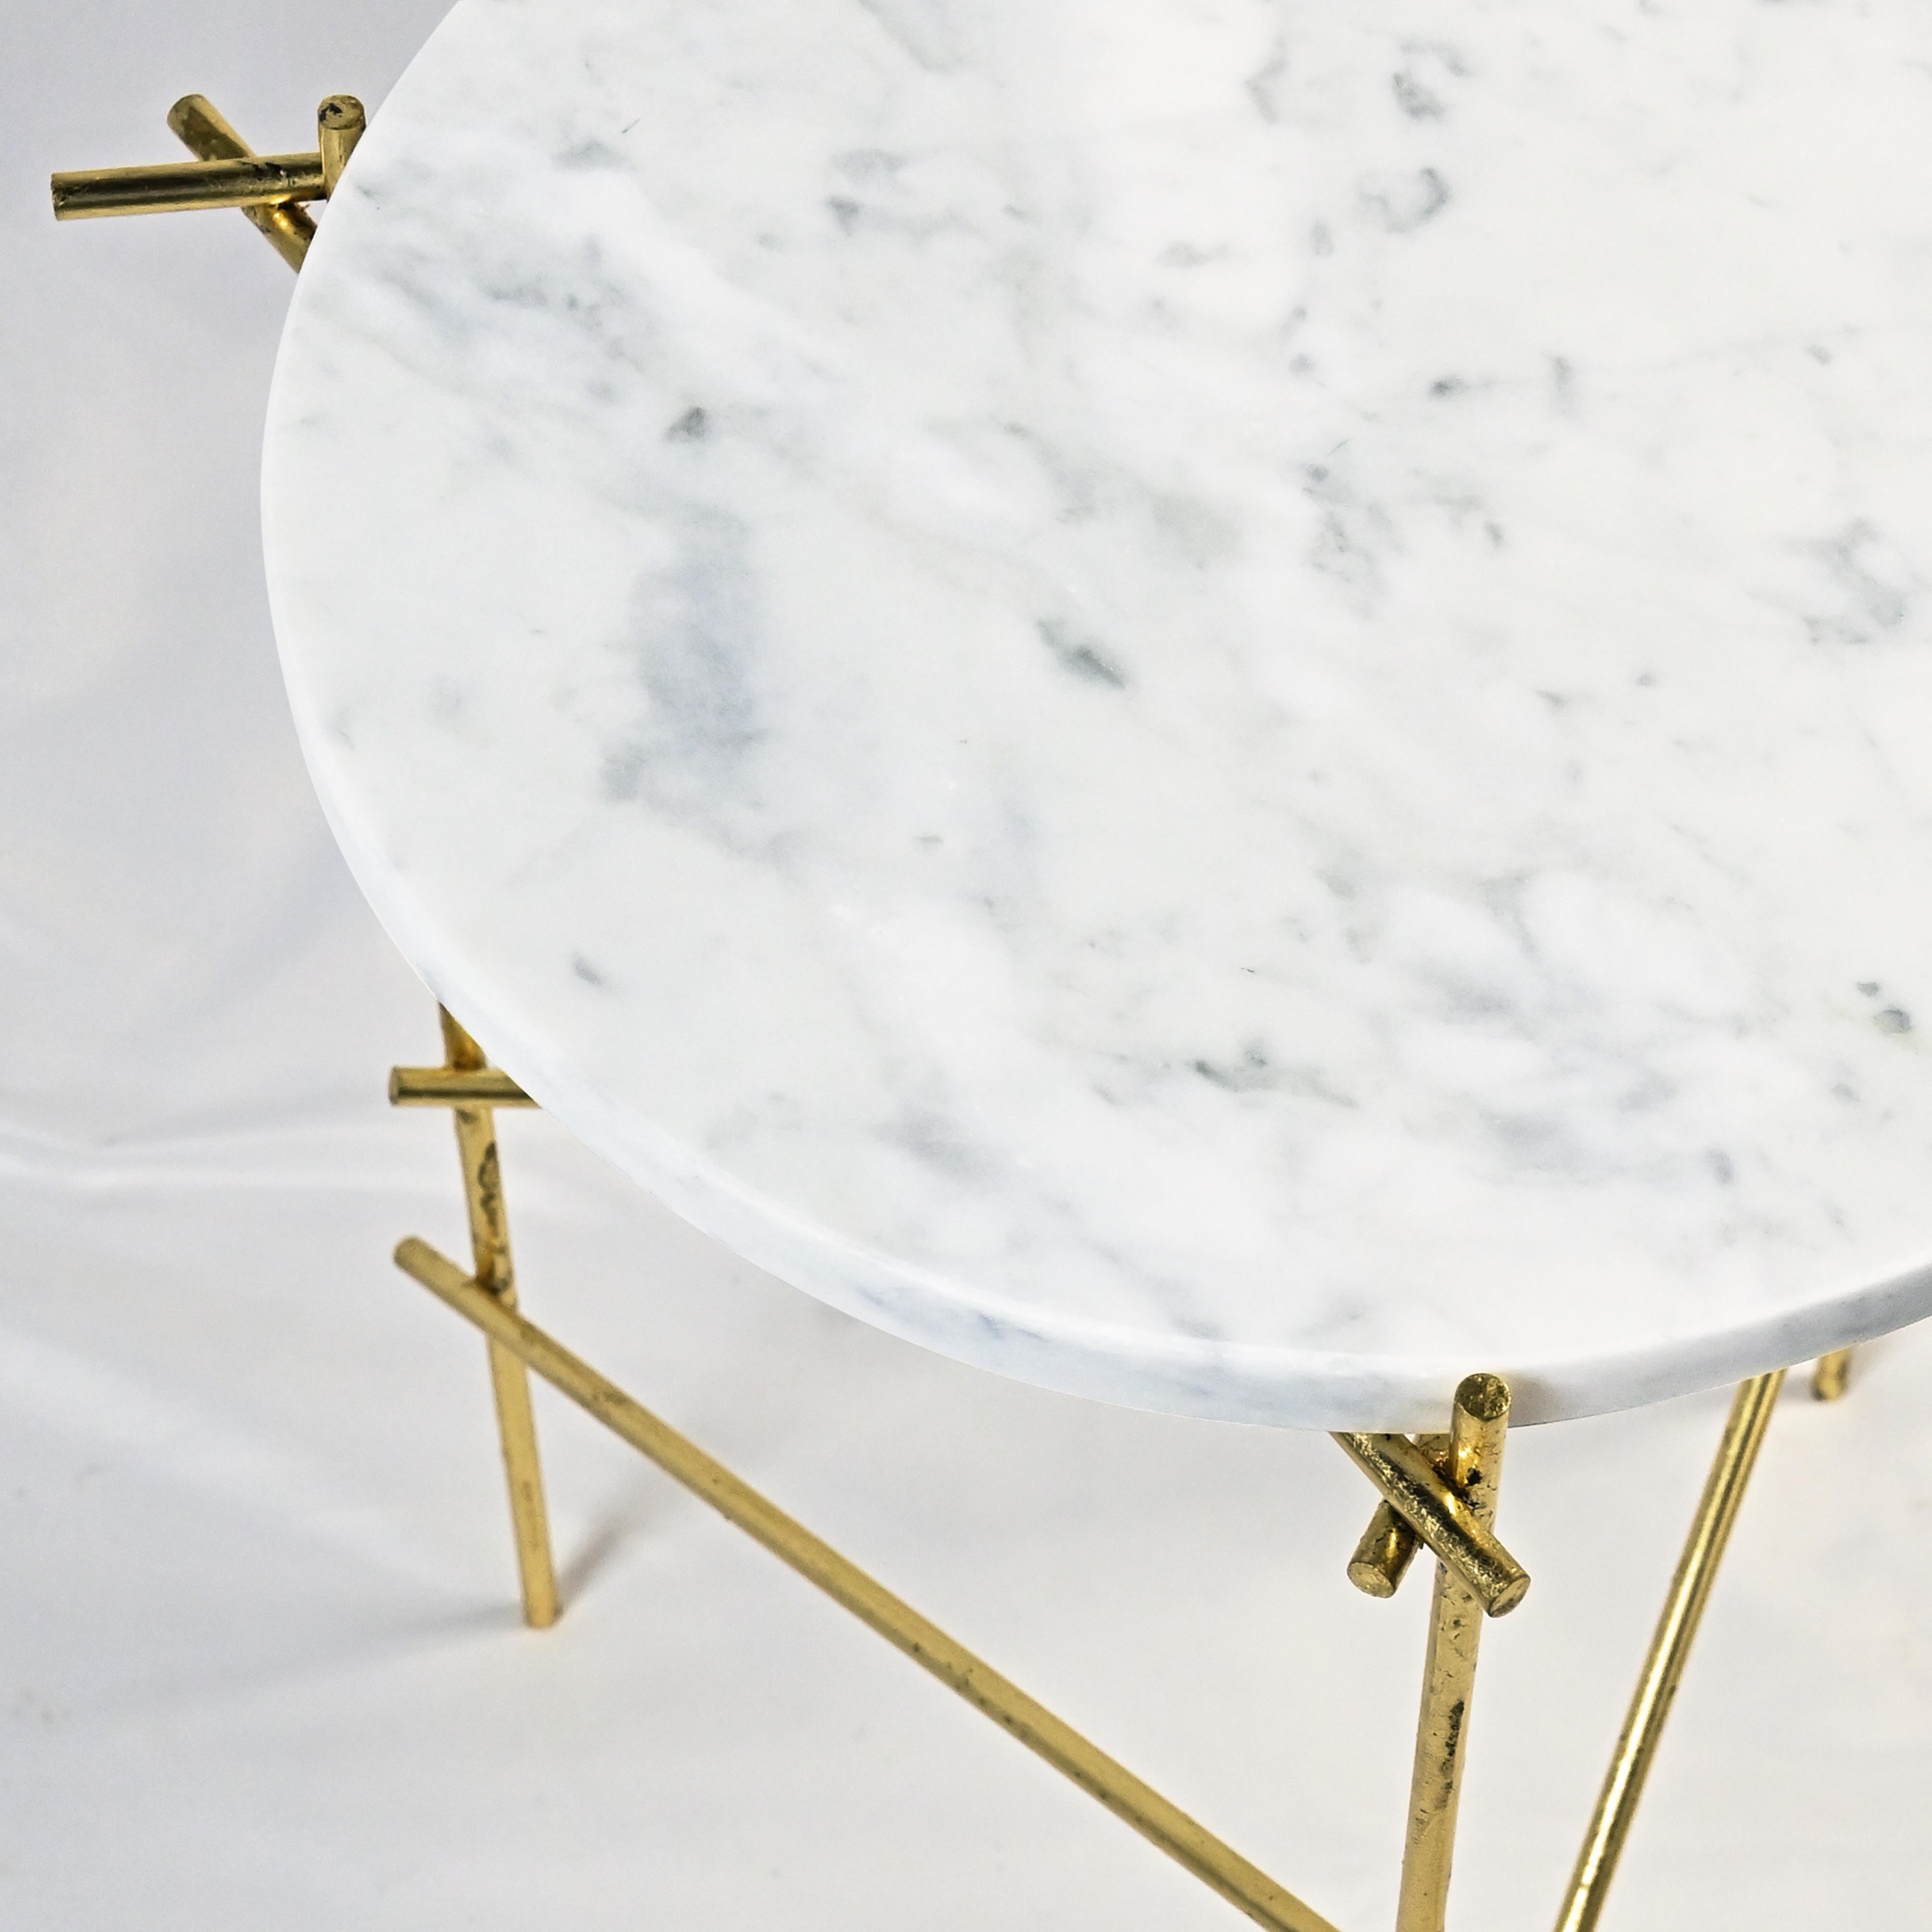 Italian The Slilts, Carrara Marble and Gold Leaf Coffee Tables By DFdesignlab  For Sale